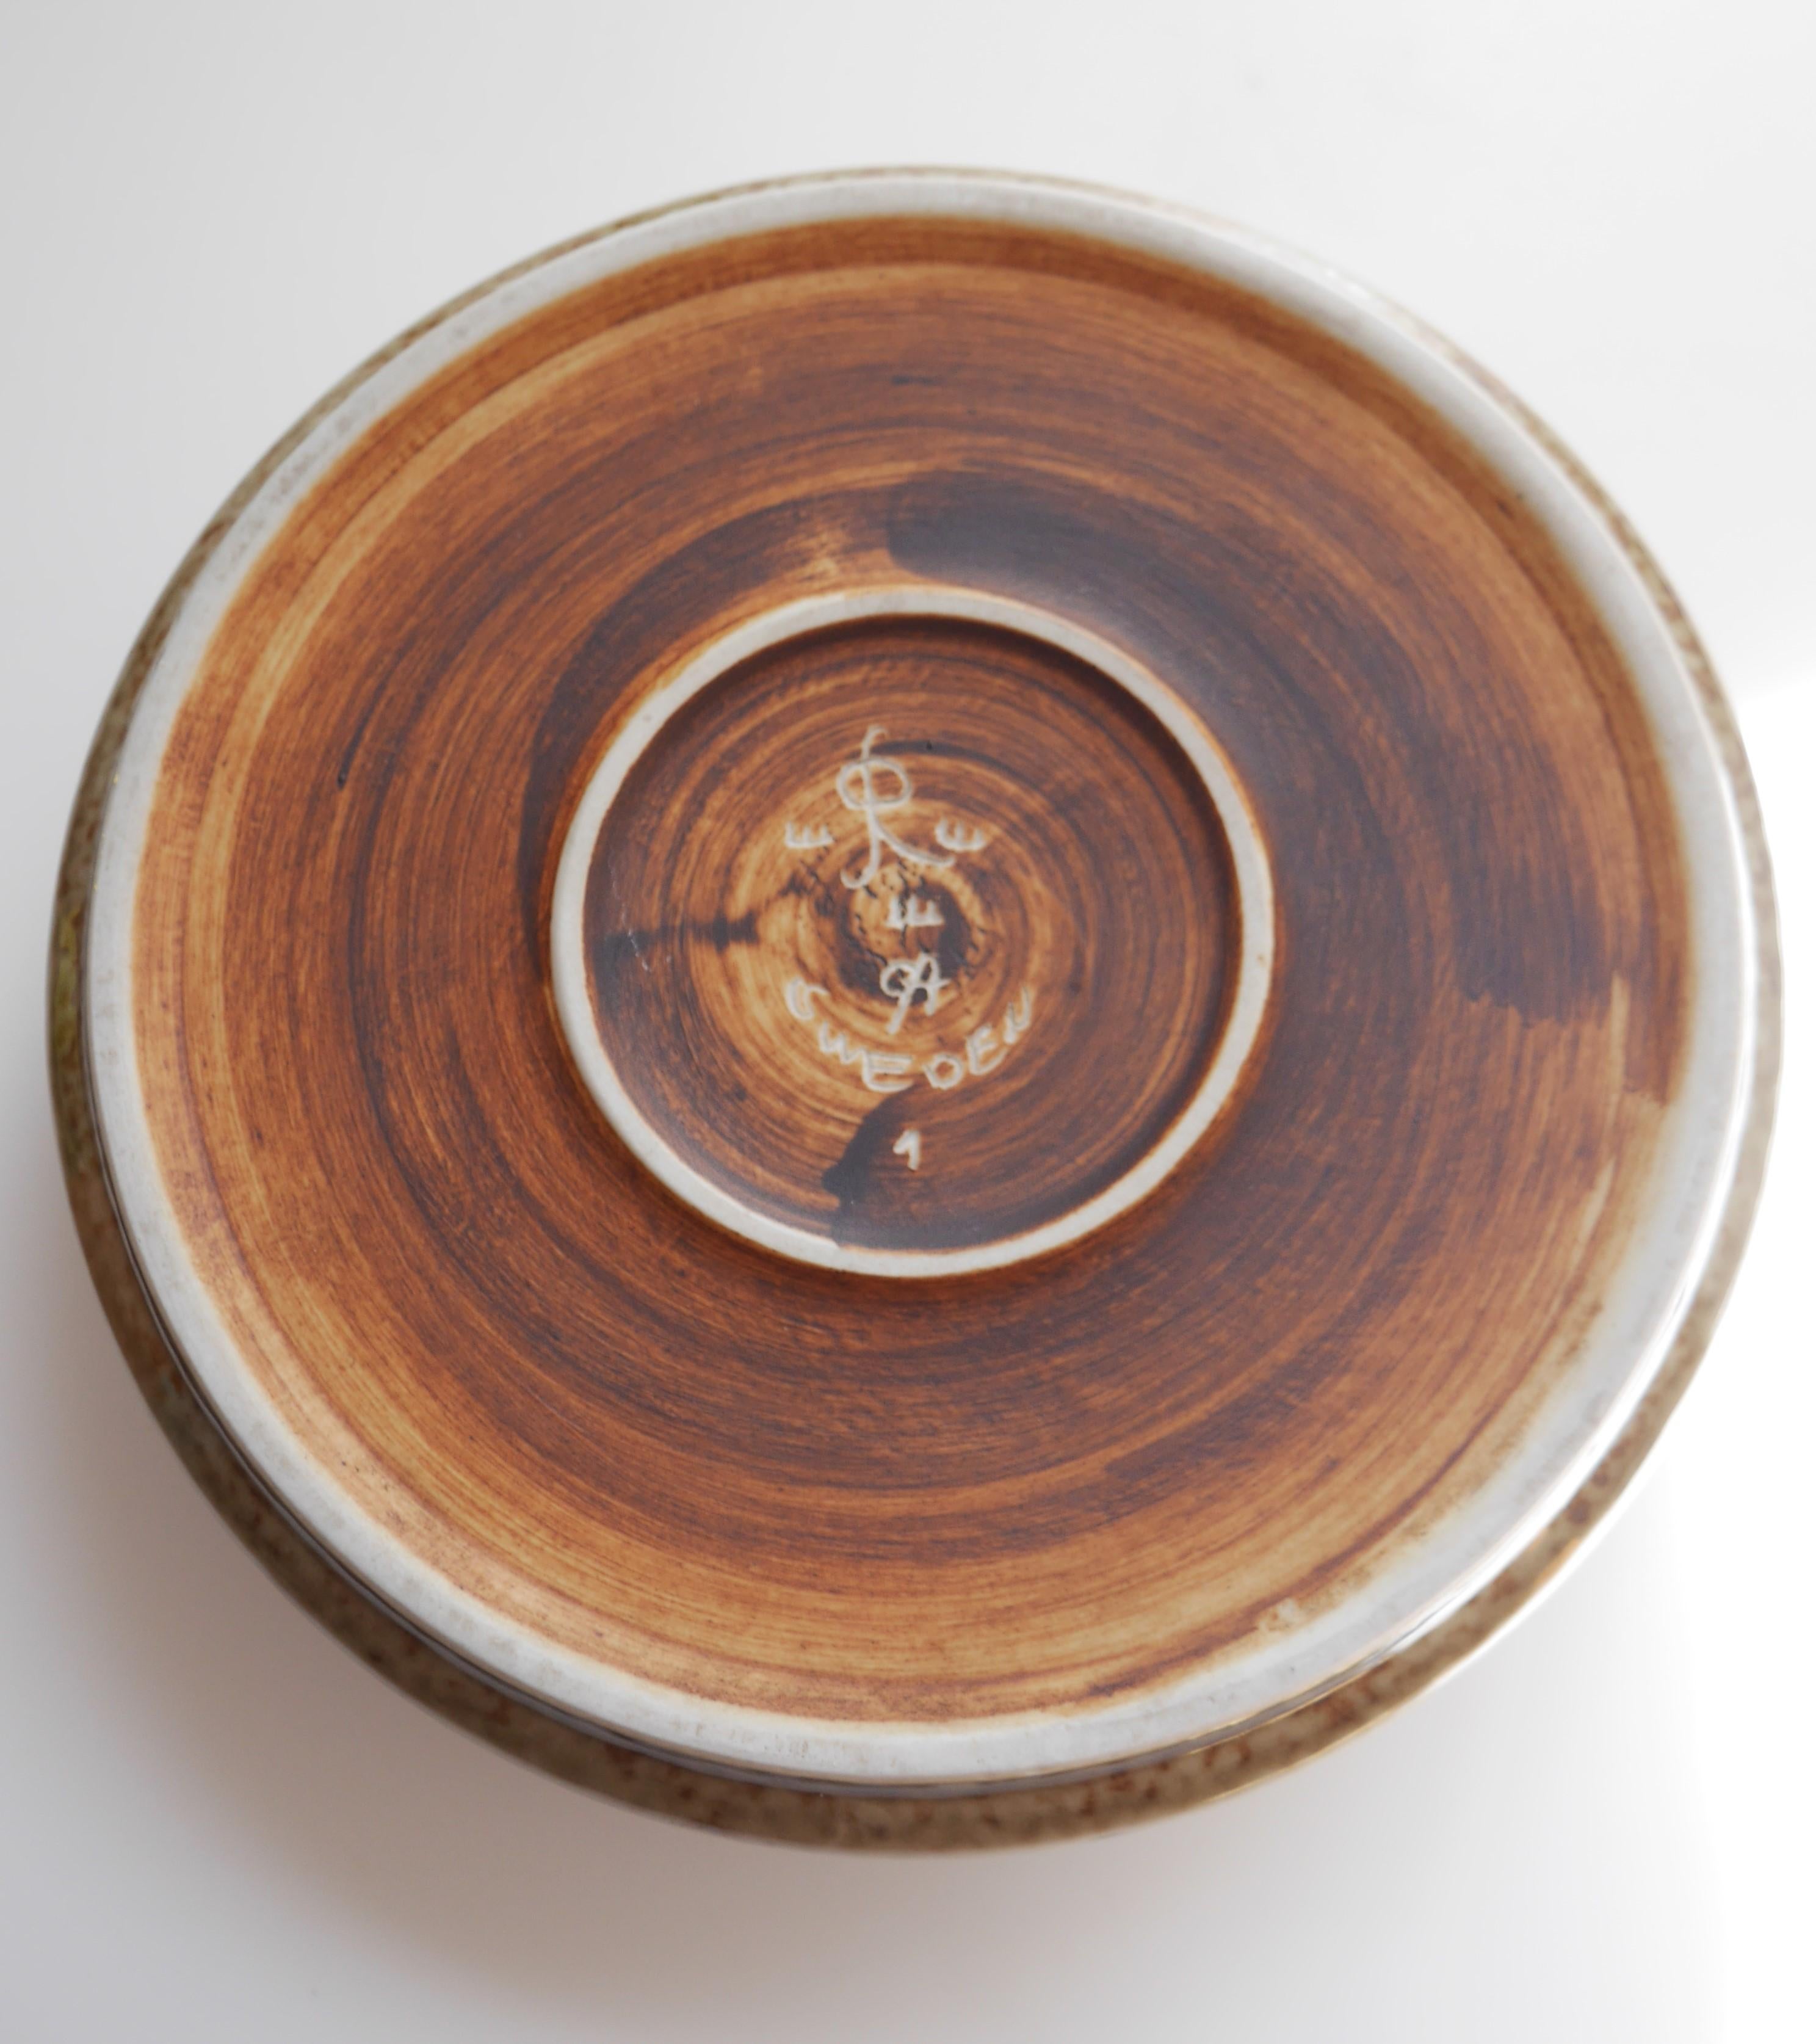 Ceramic Mid-century modern pottery bowl, known as 